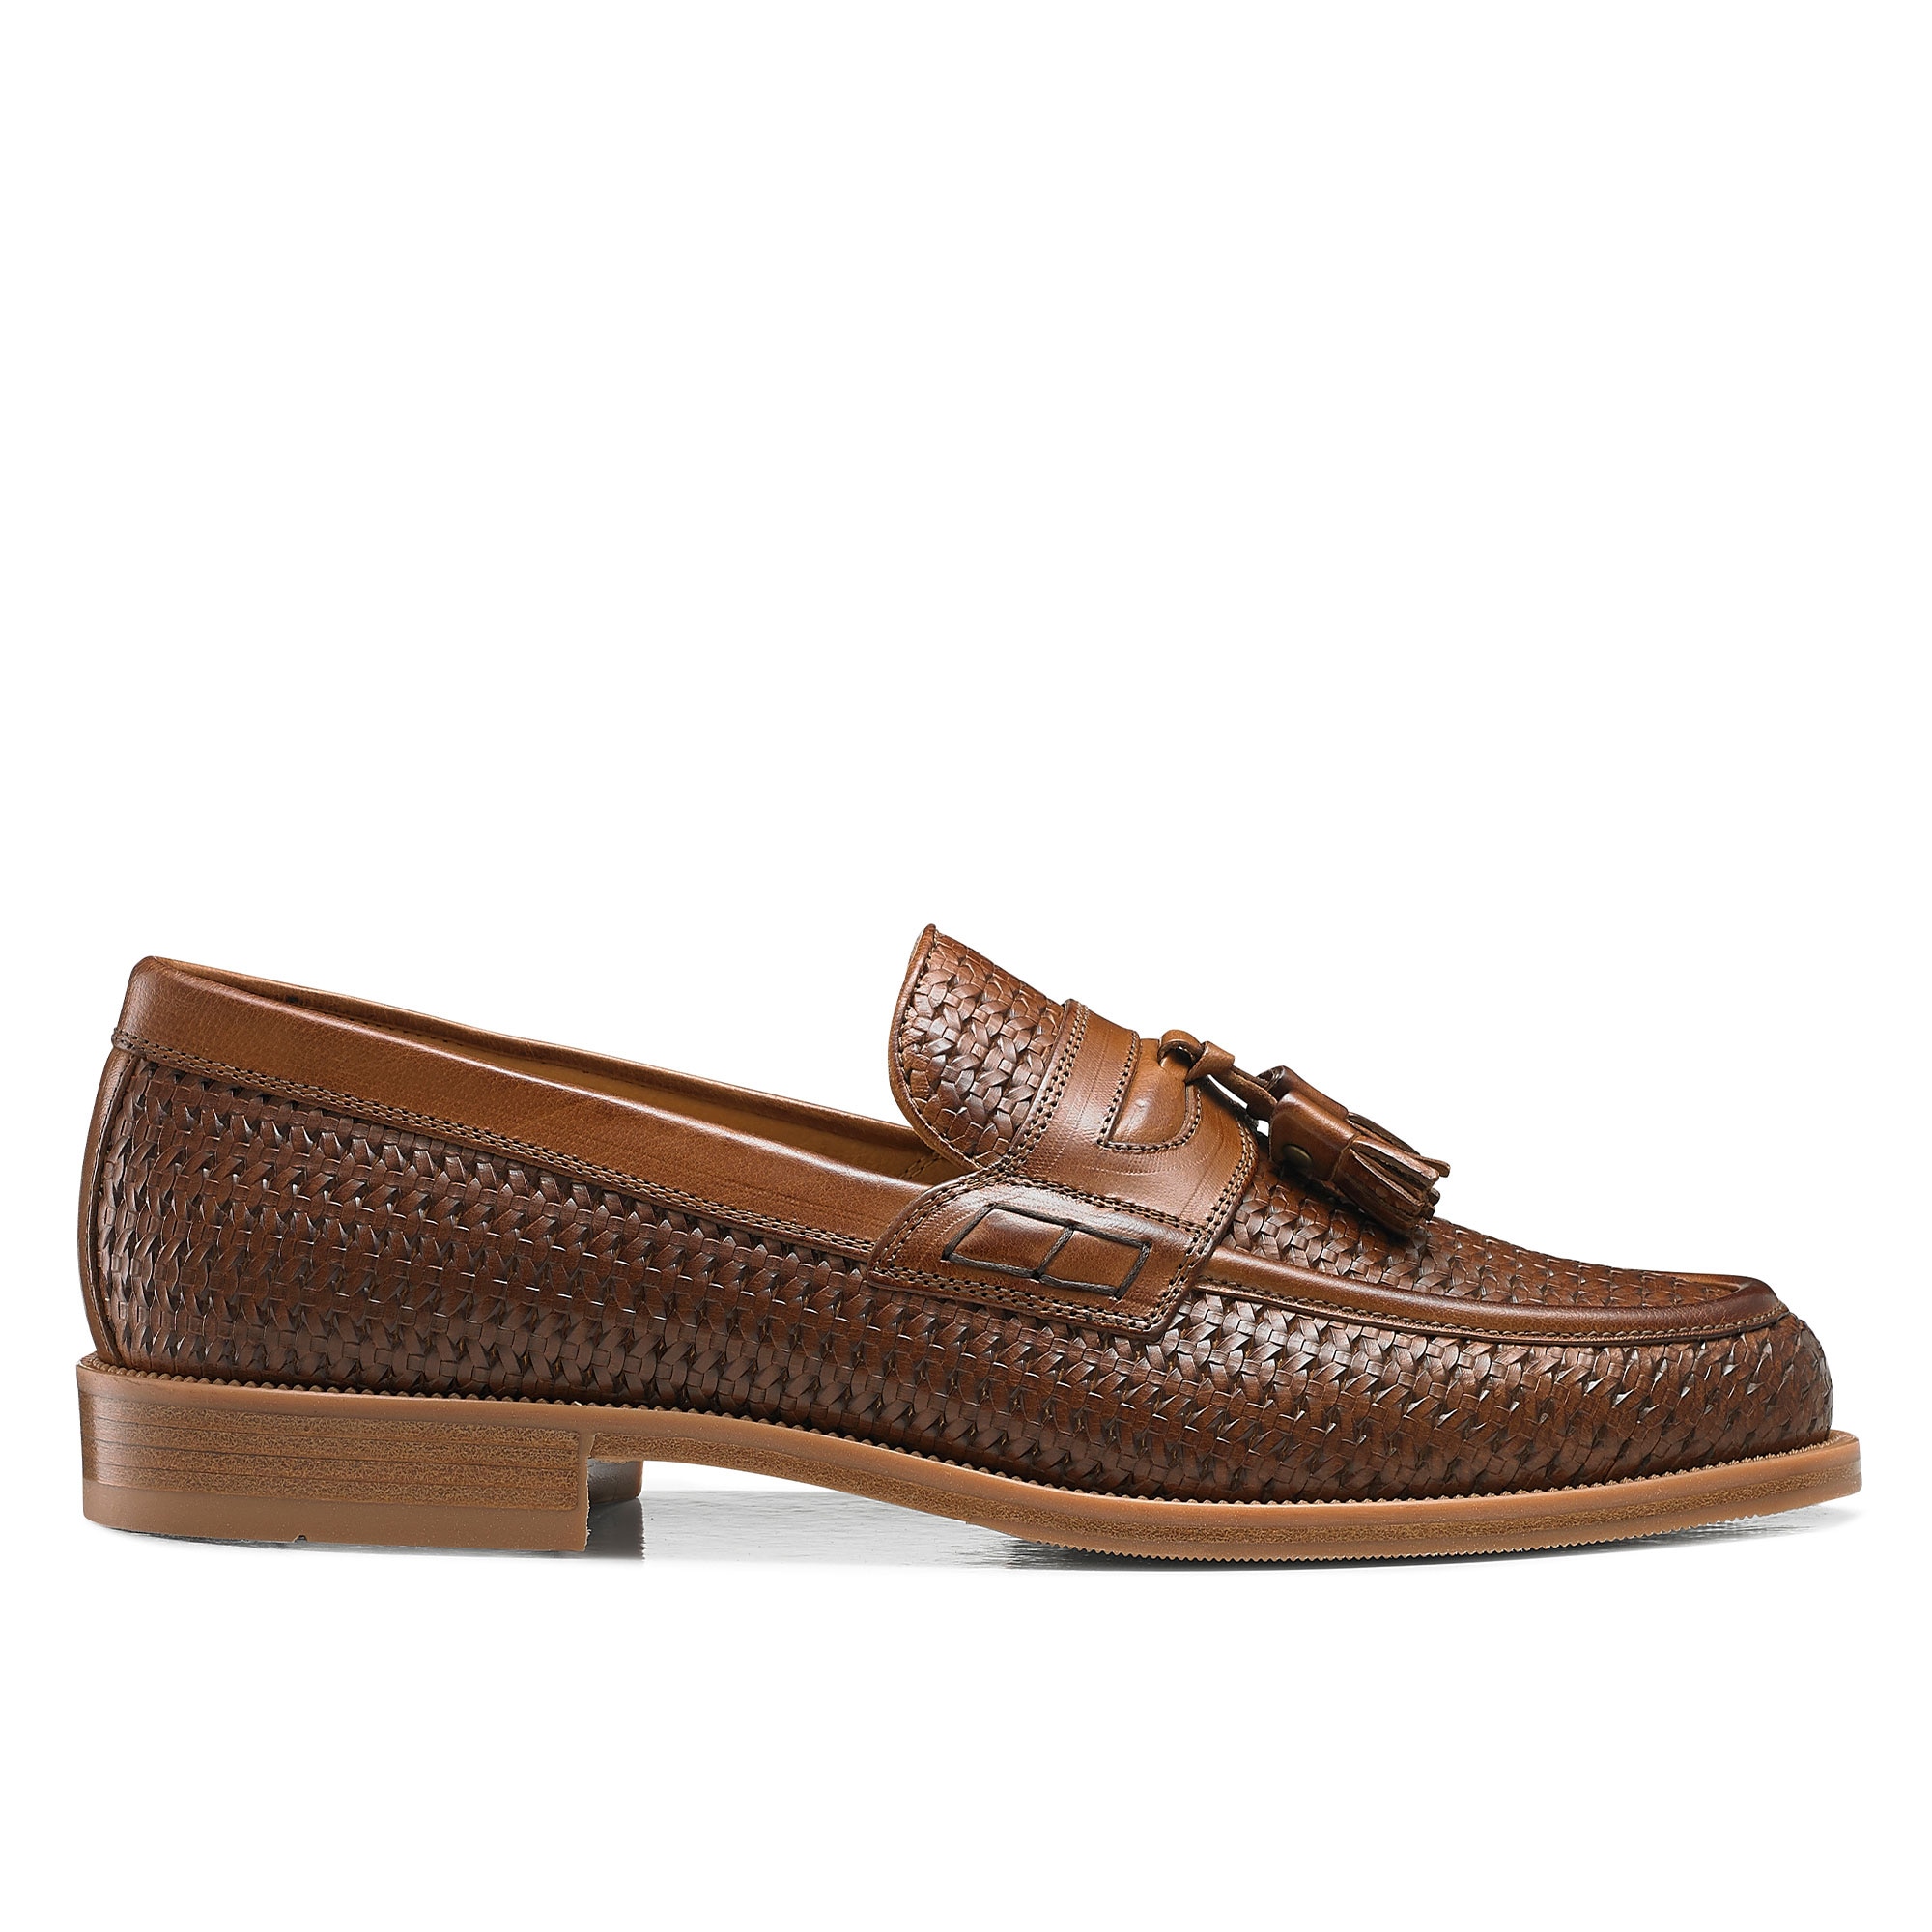 Russell and Bromley Keeble 4 tassel college men's loafer